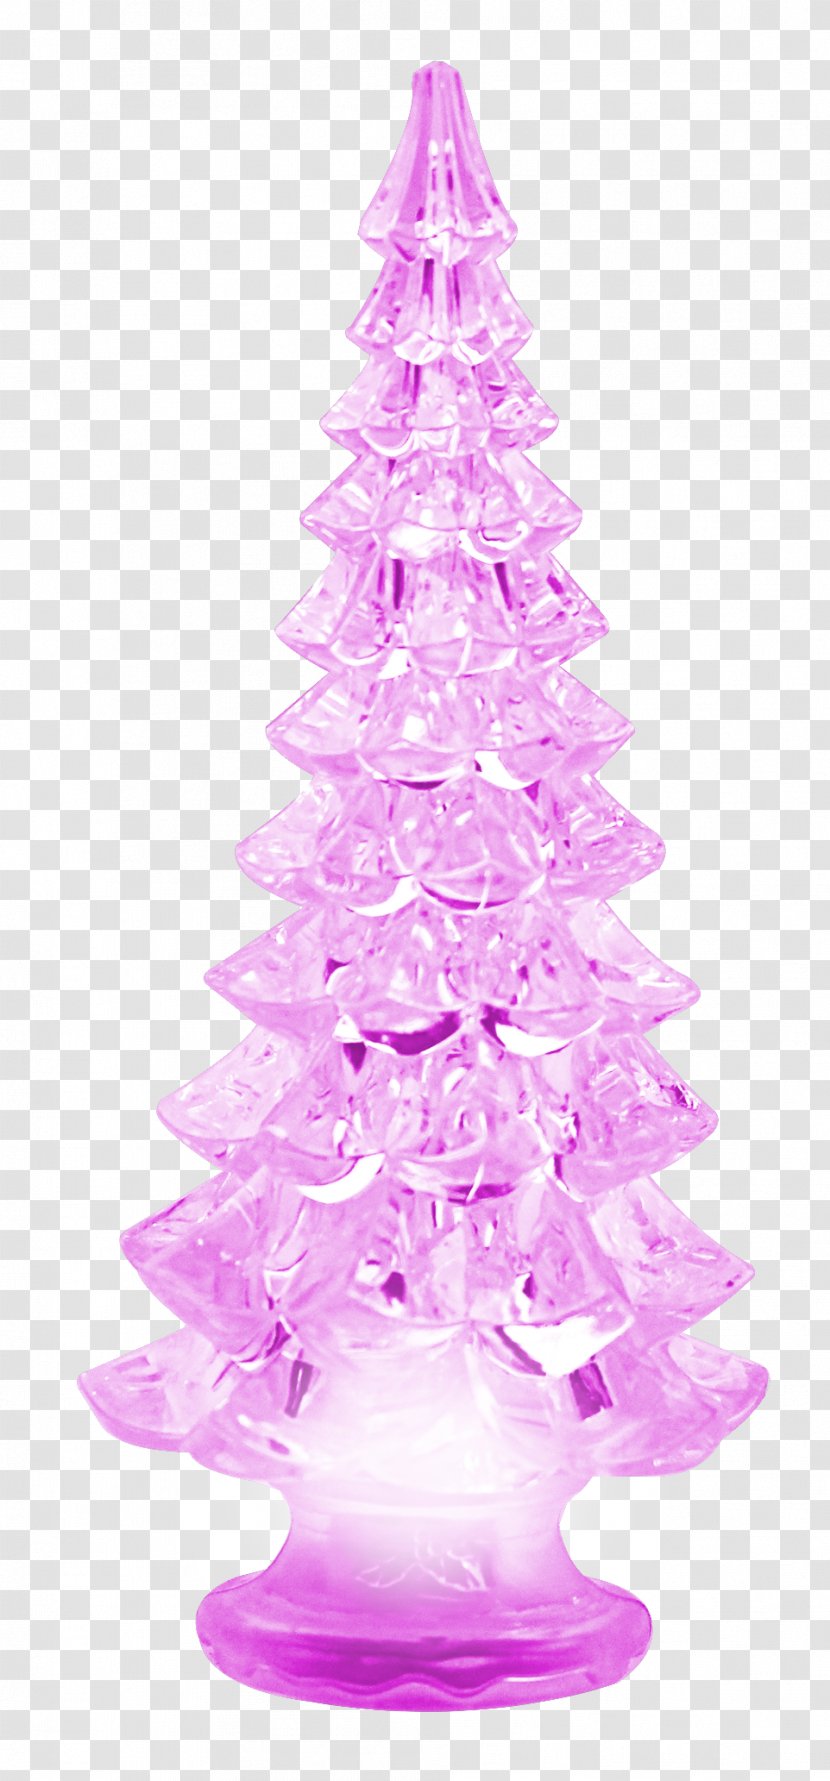 Christmas Tree Ornament Export Spruce - Dominos Transparent PNG